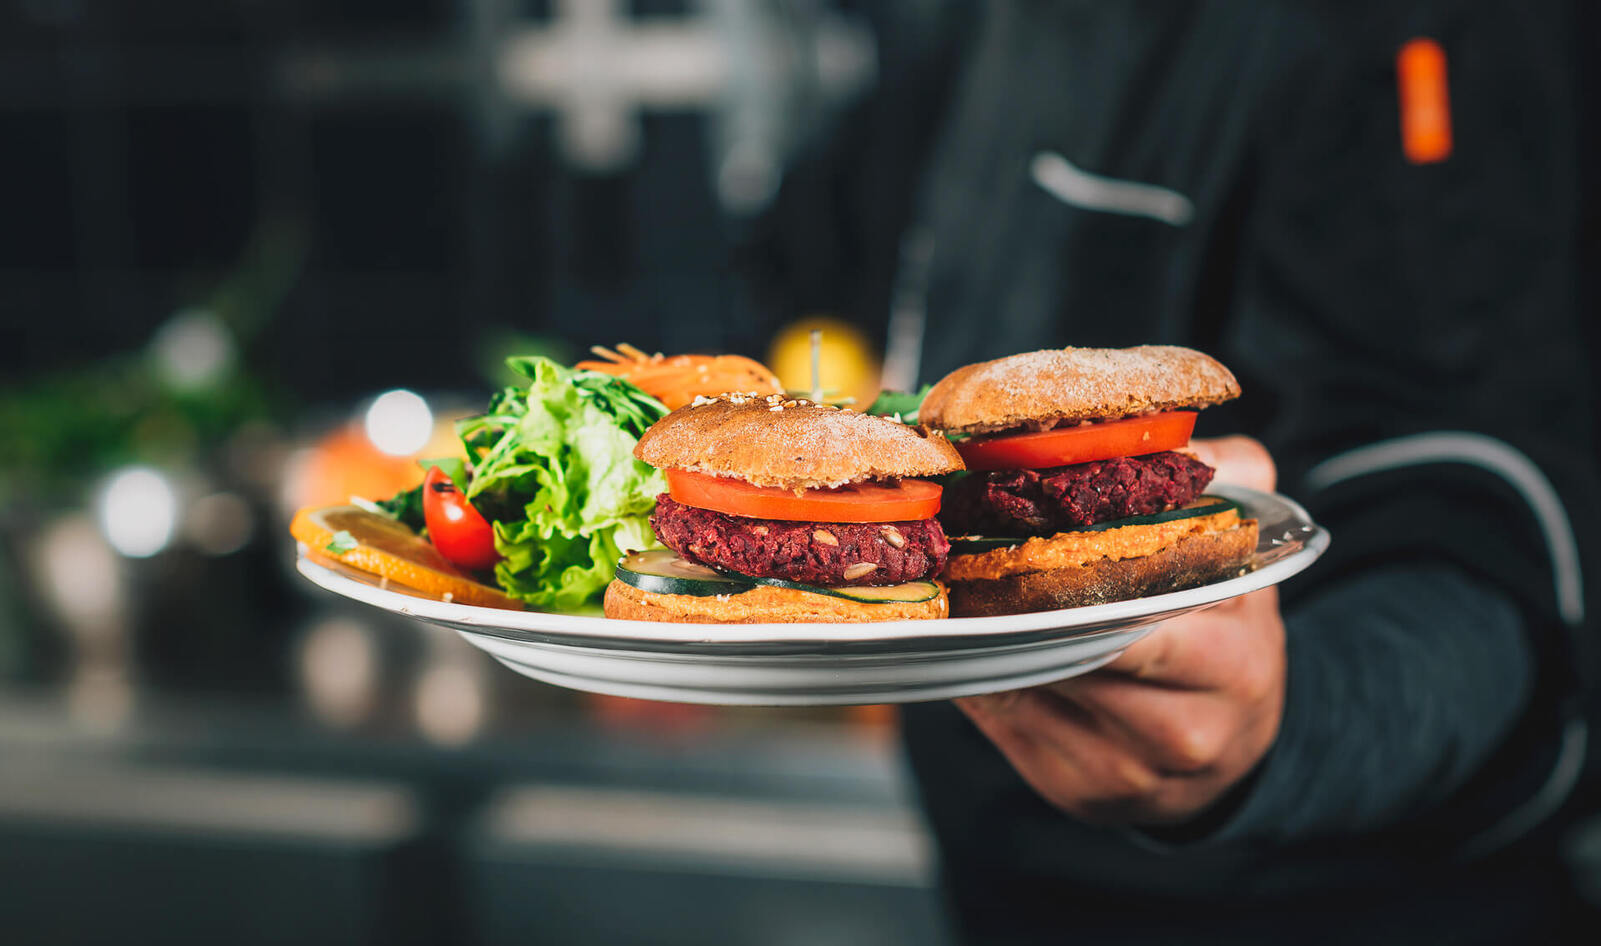 New Research Finds Plant-Based Meat Is Healthier and More Sustainable Than Animal Meat&nbsp;